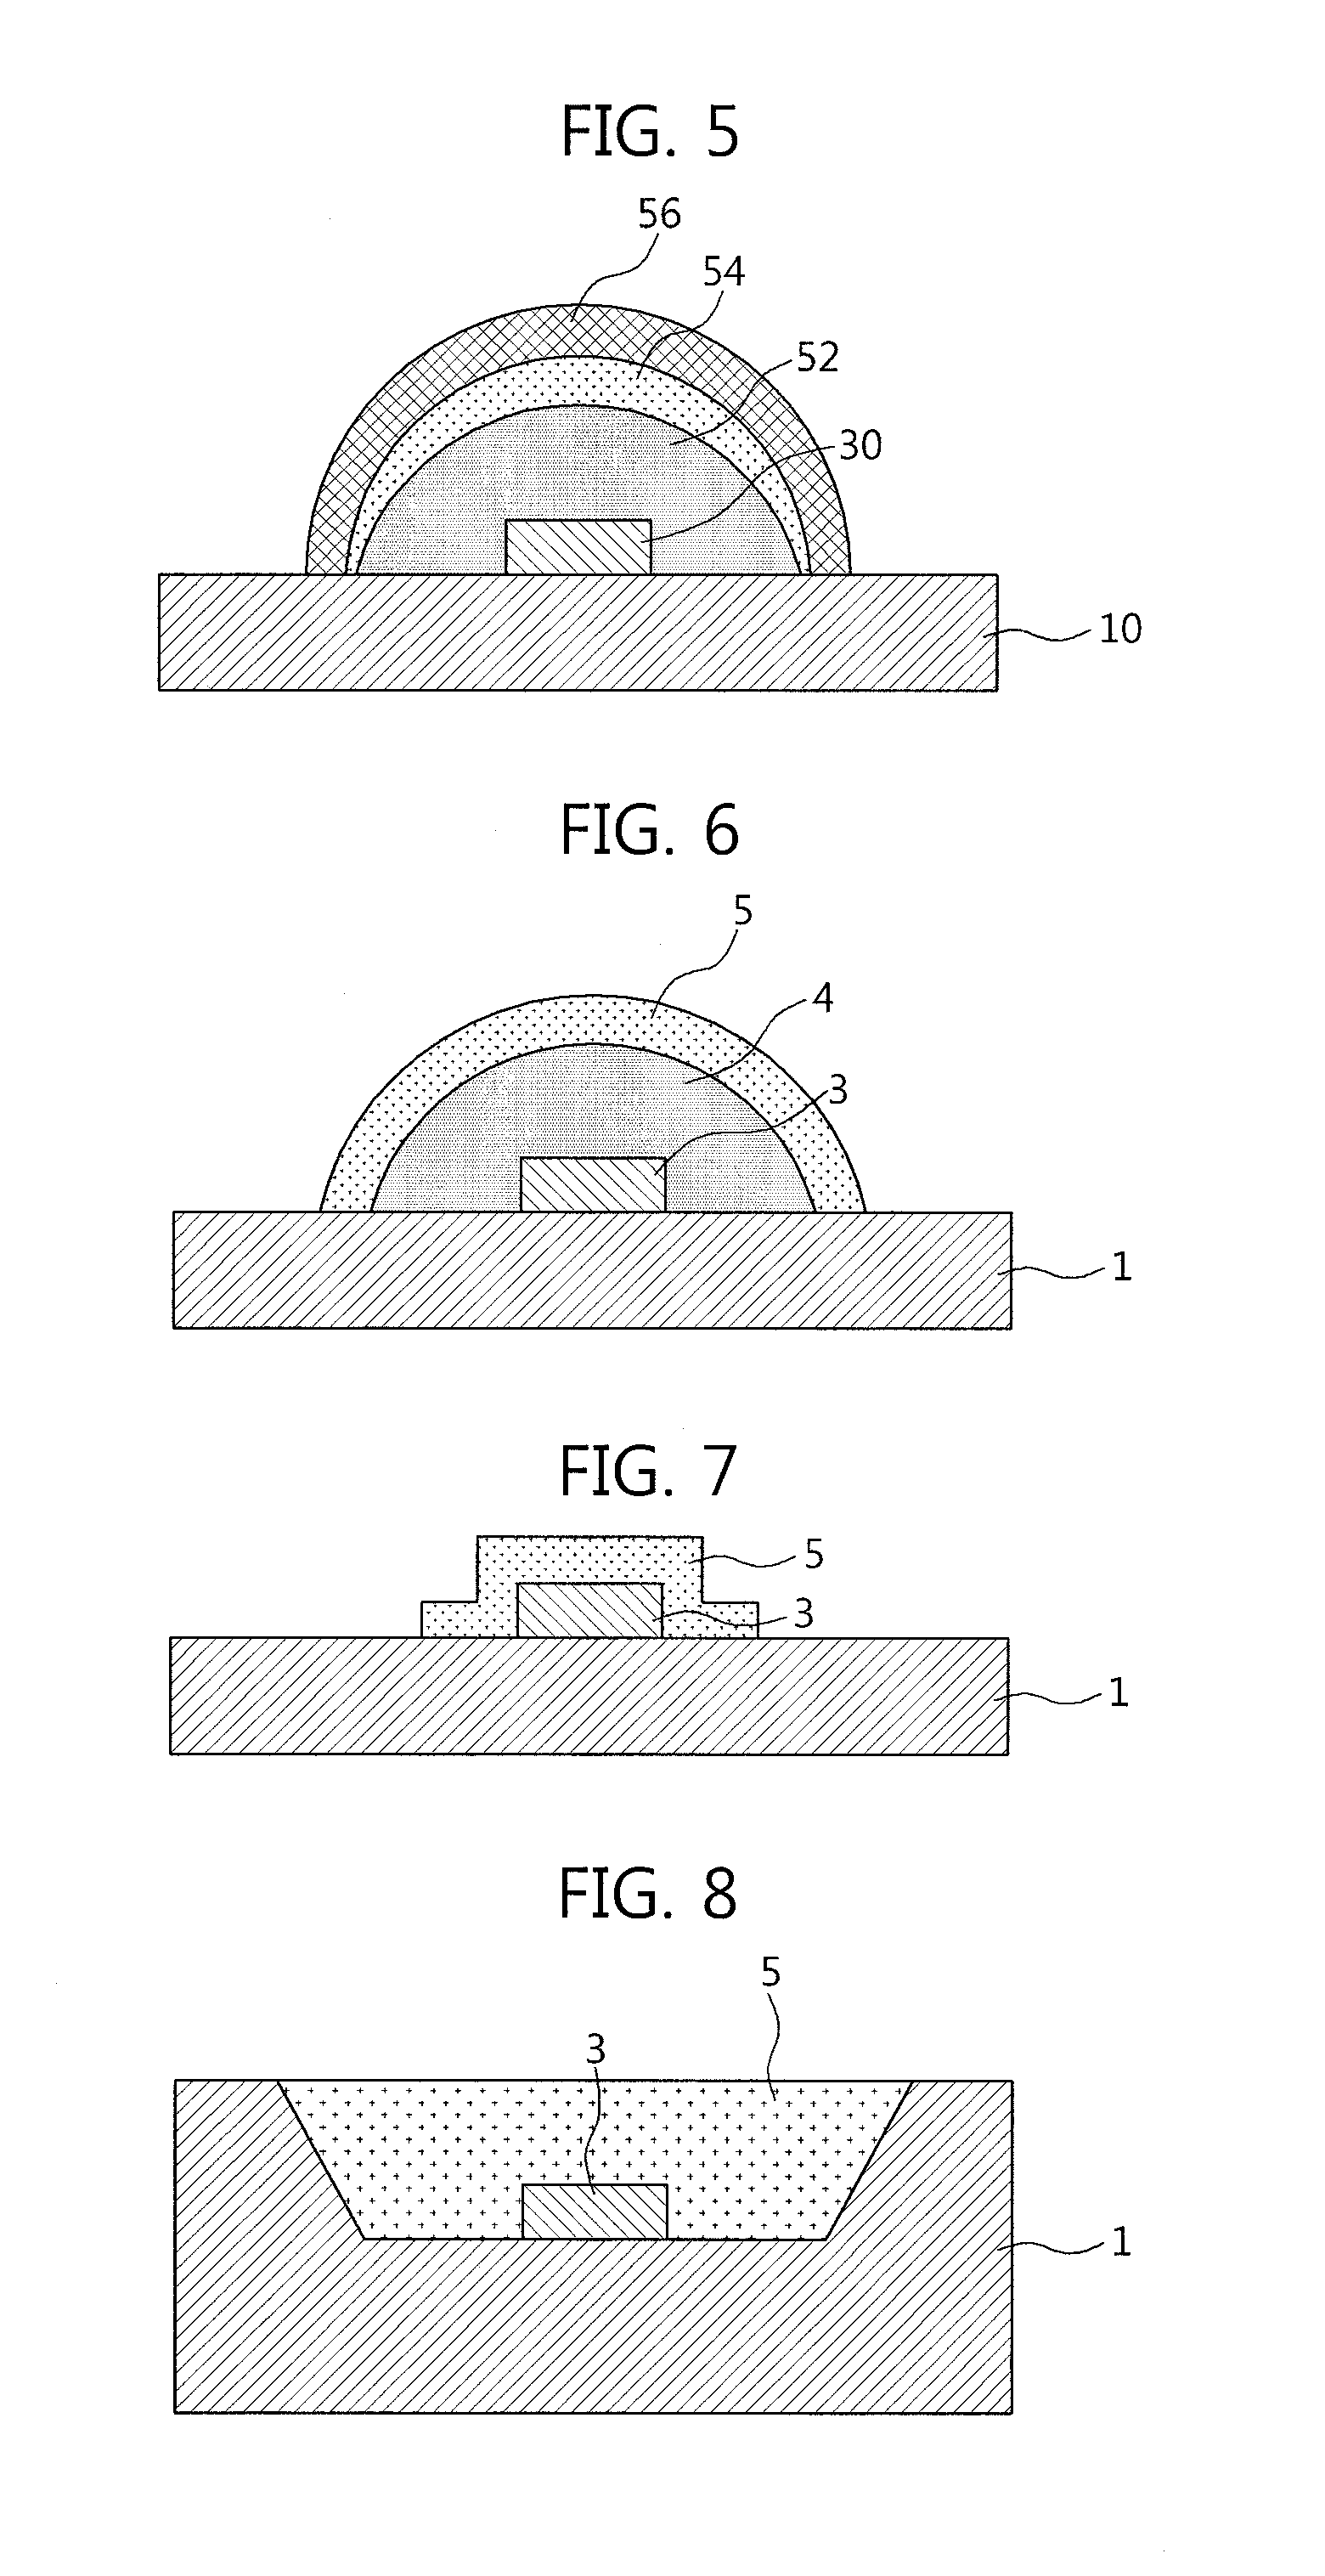 Light-emitting diode having a wavelength conversion material layer, and method for fabricating same